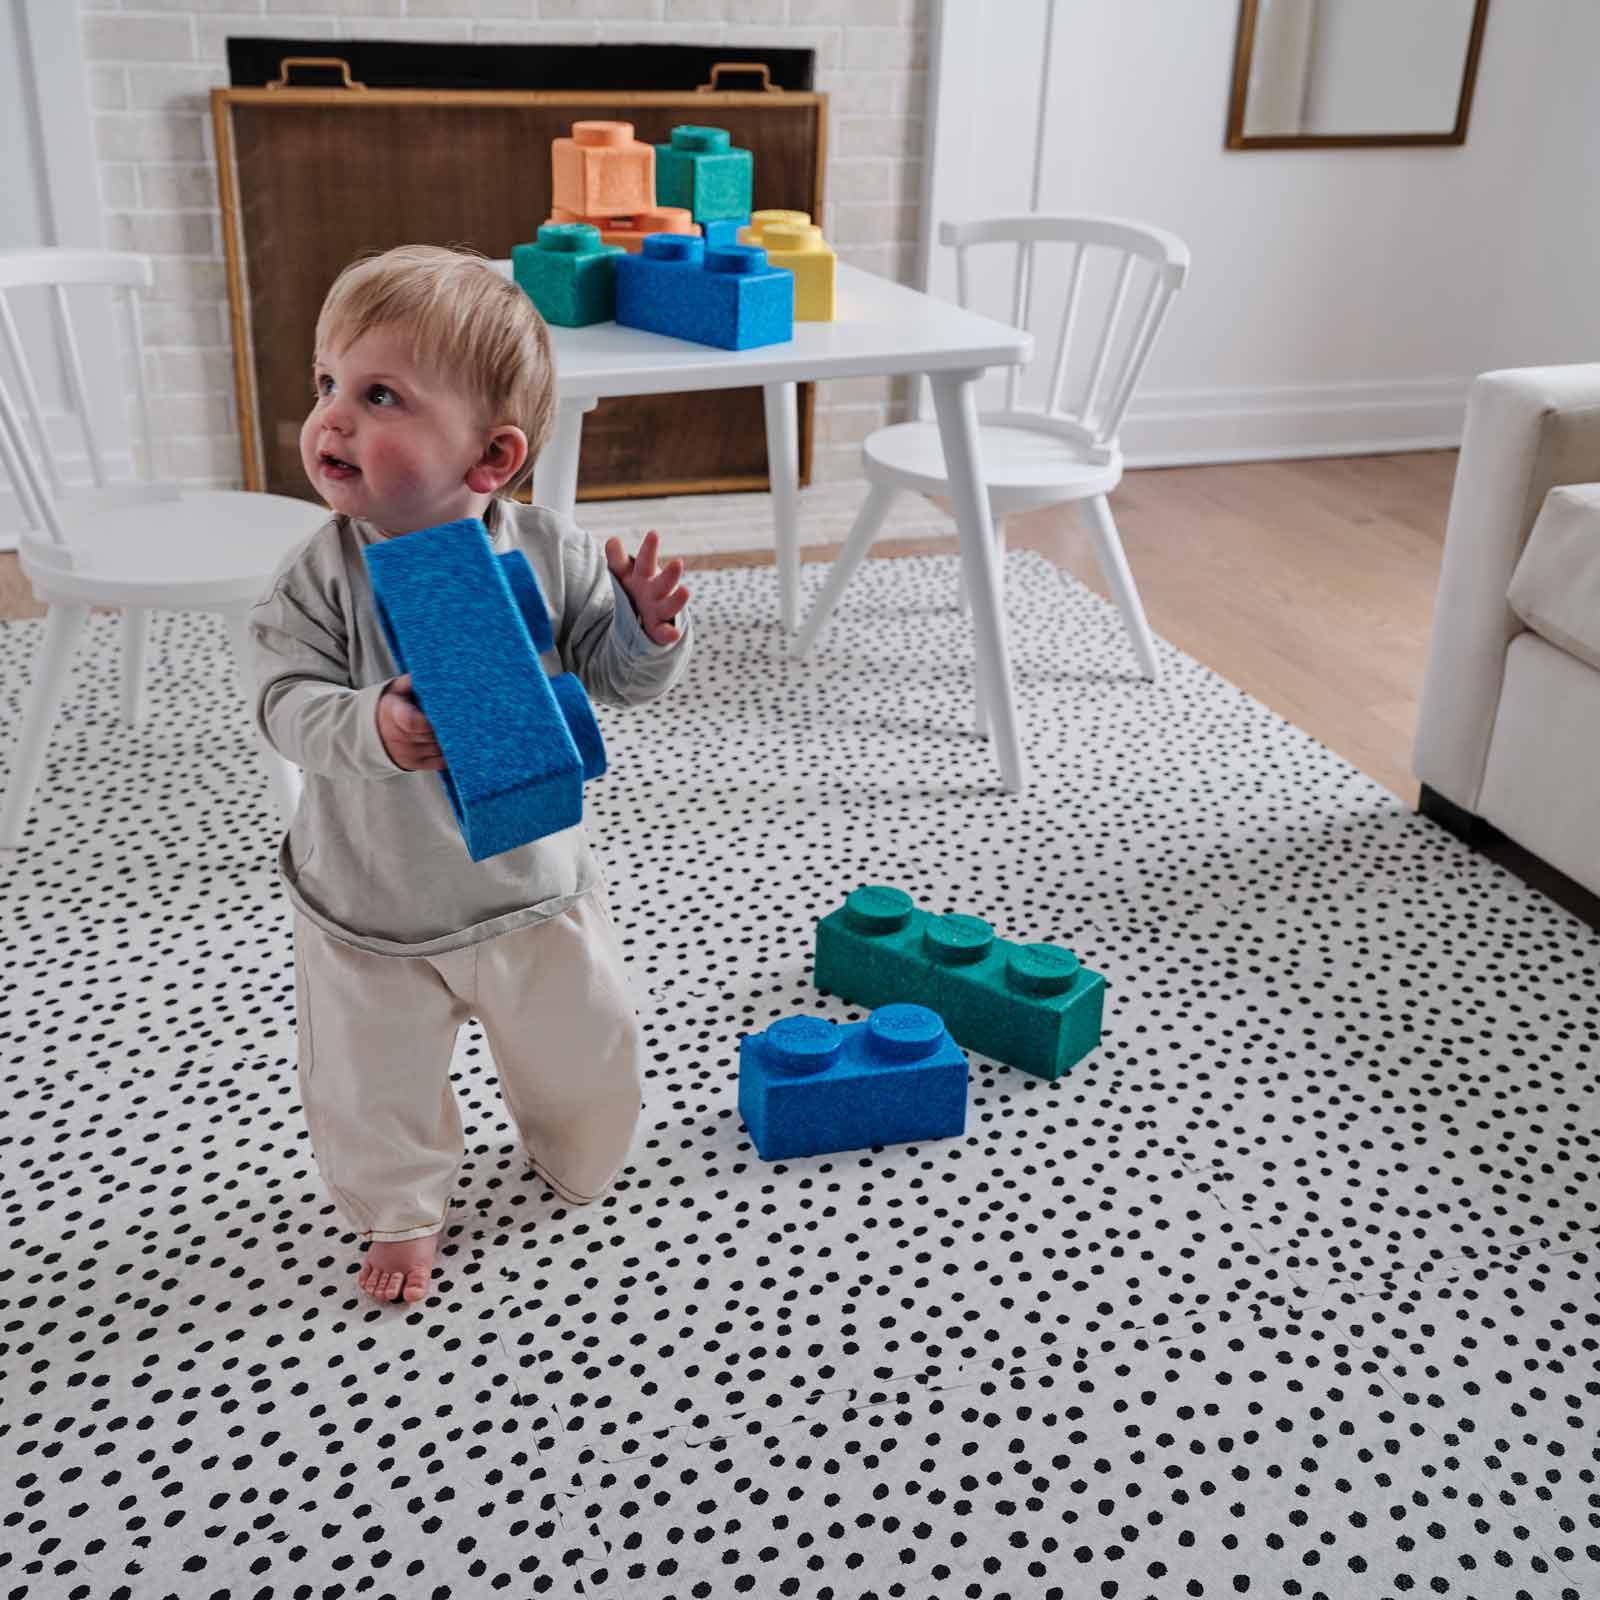 Apollo Pepper black and white spotted pattern play mat shown in living room with toddler boy carrying giant lego blocks